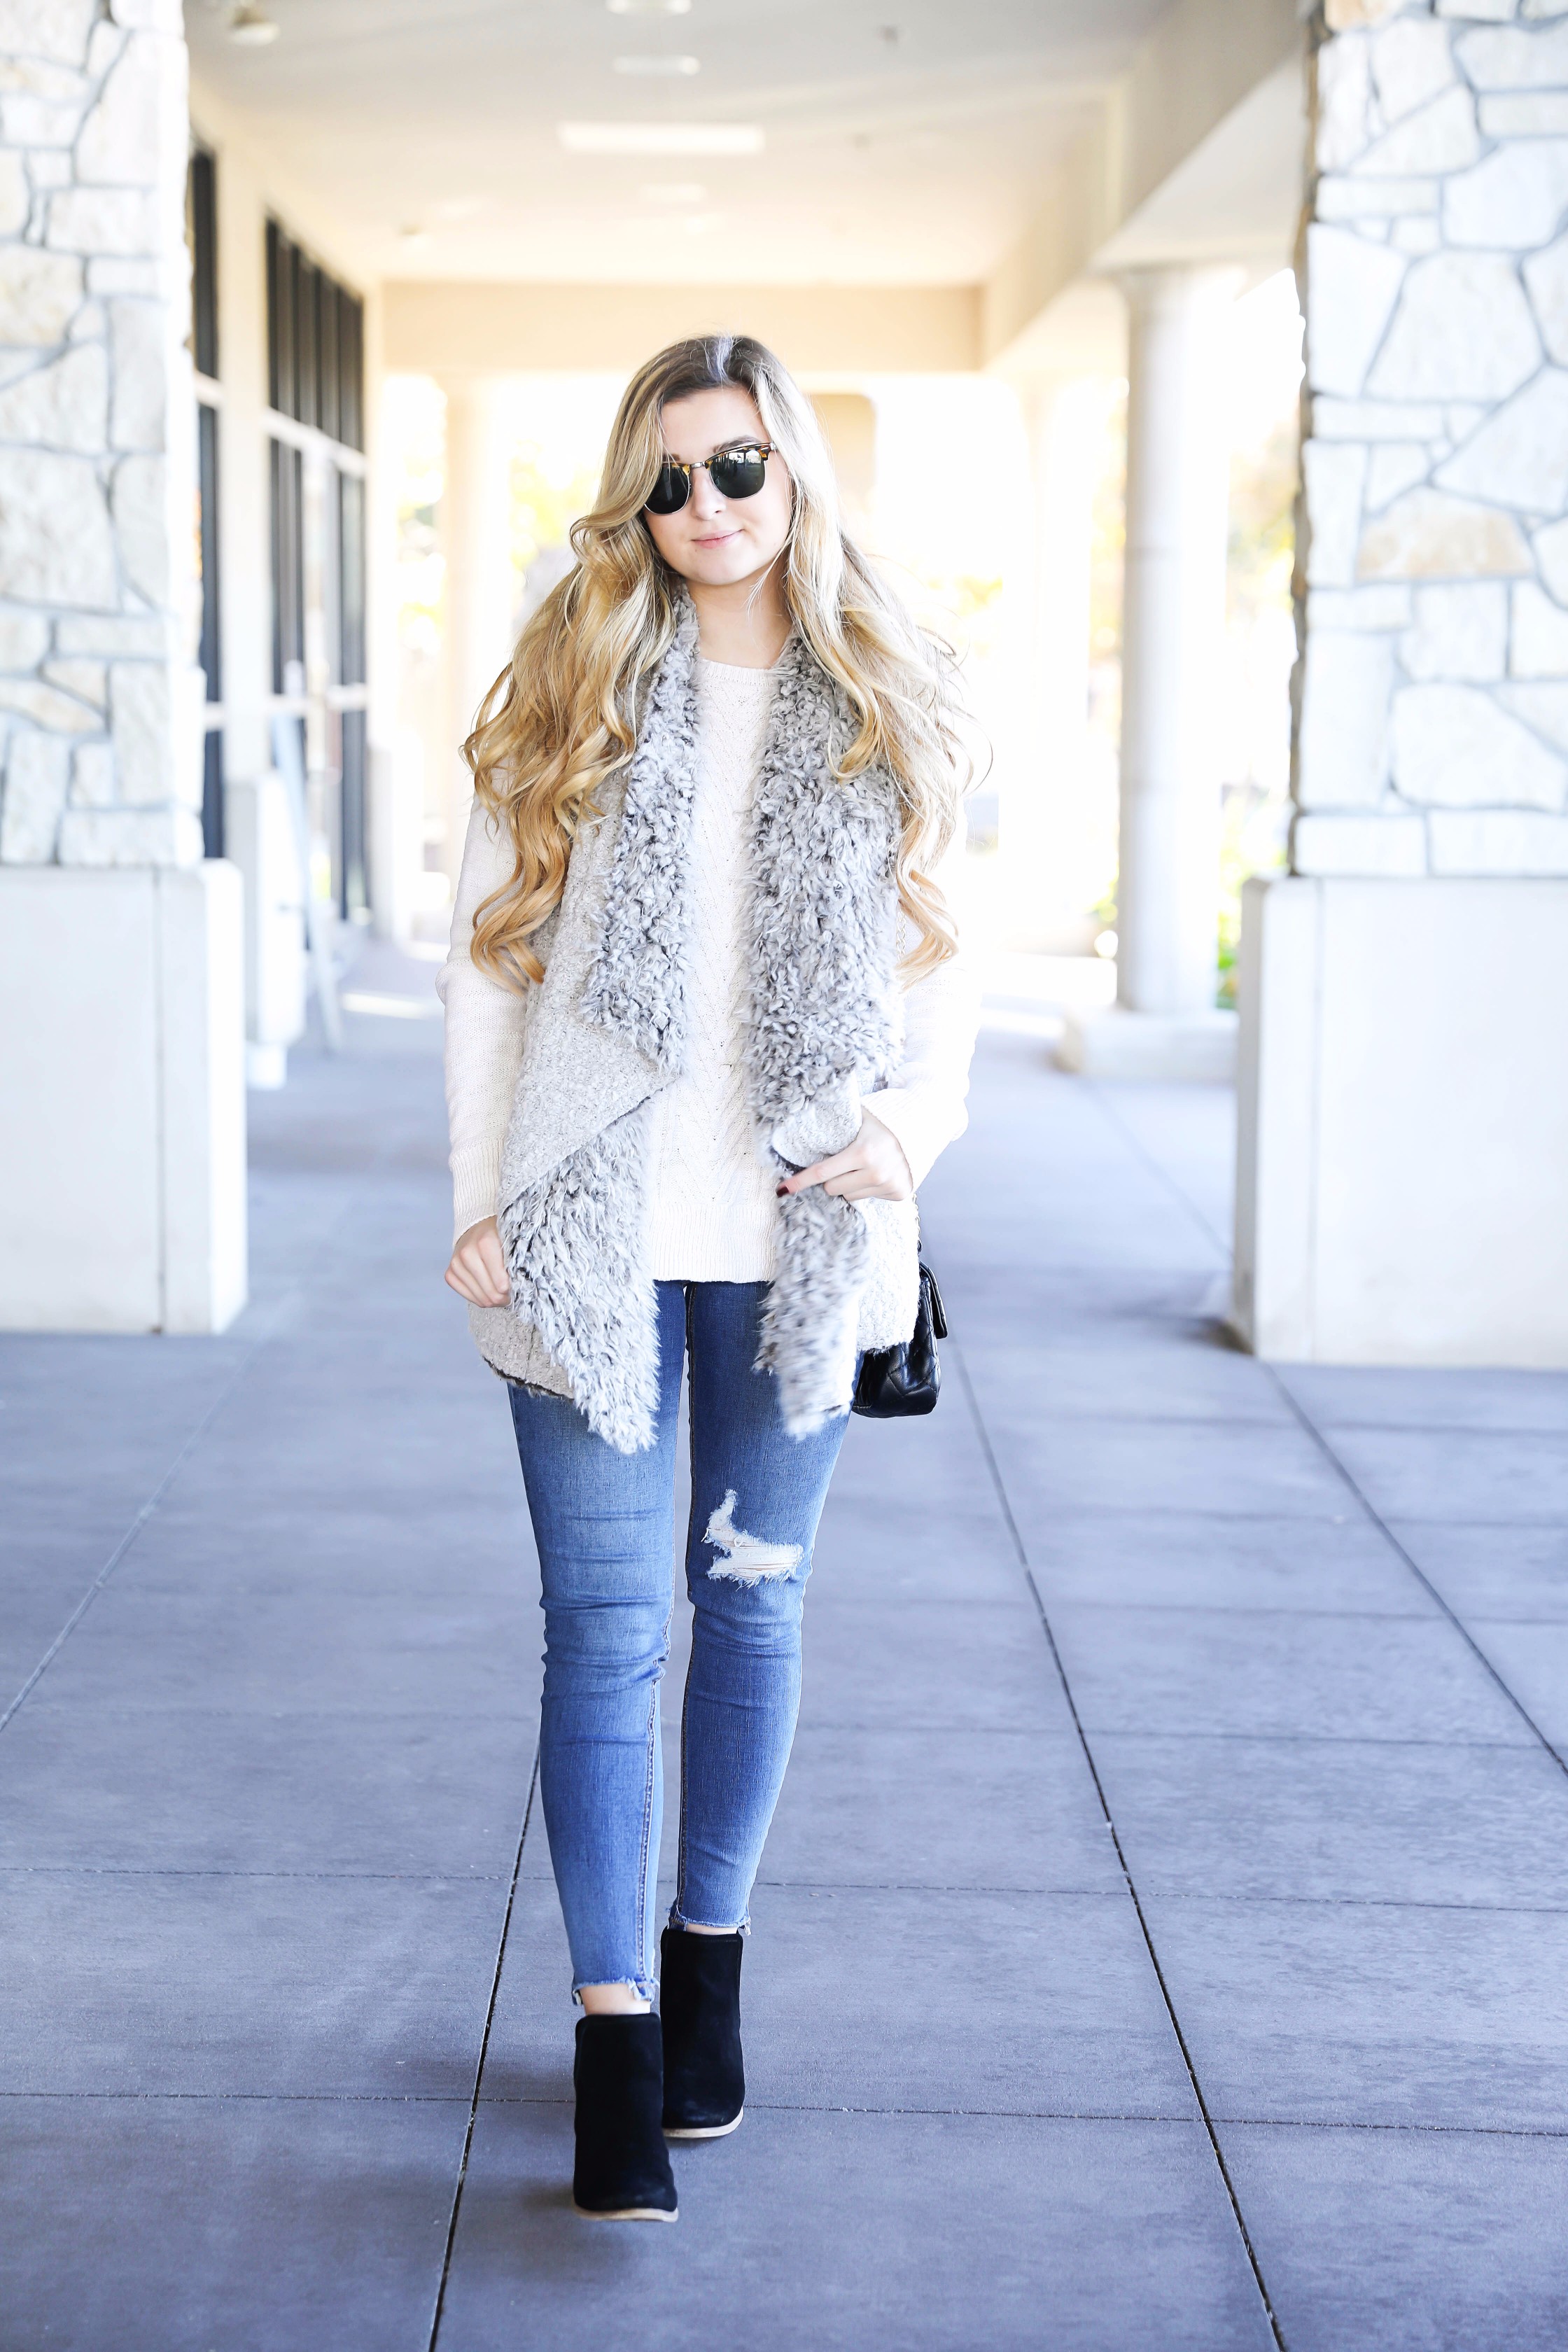 Fuzzy vest with cable knit sweater! Paired with my favorite ripped jeans and clubmaster sunglasses. These black booties are the best! Details on fashion blog daily dose of charm by lauren lindmark